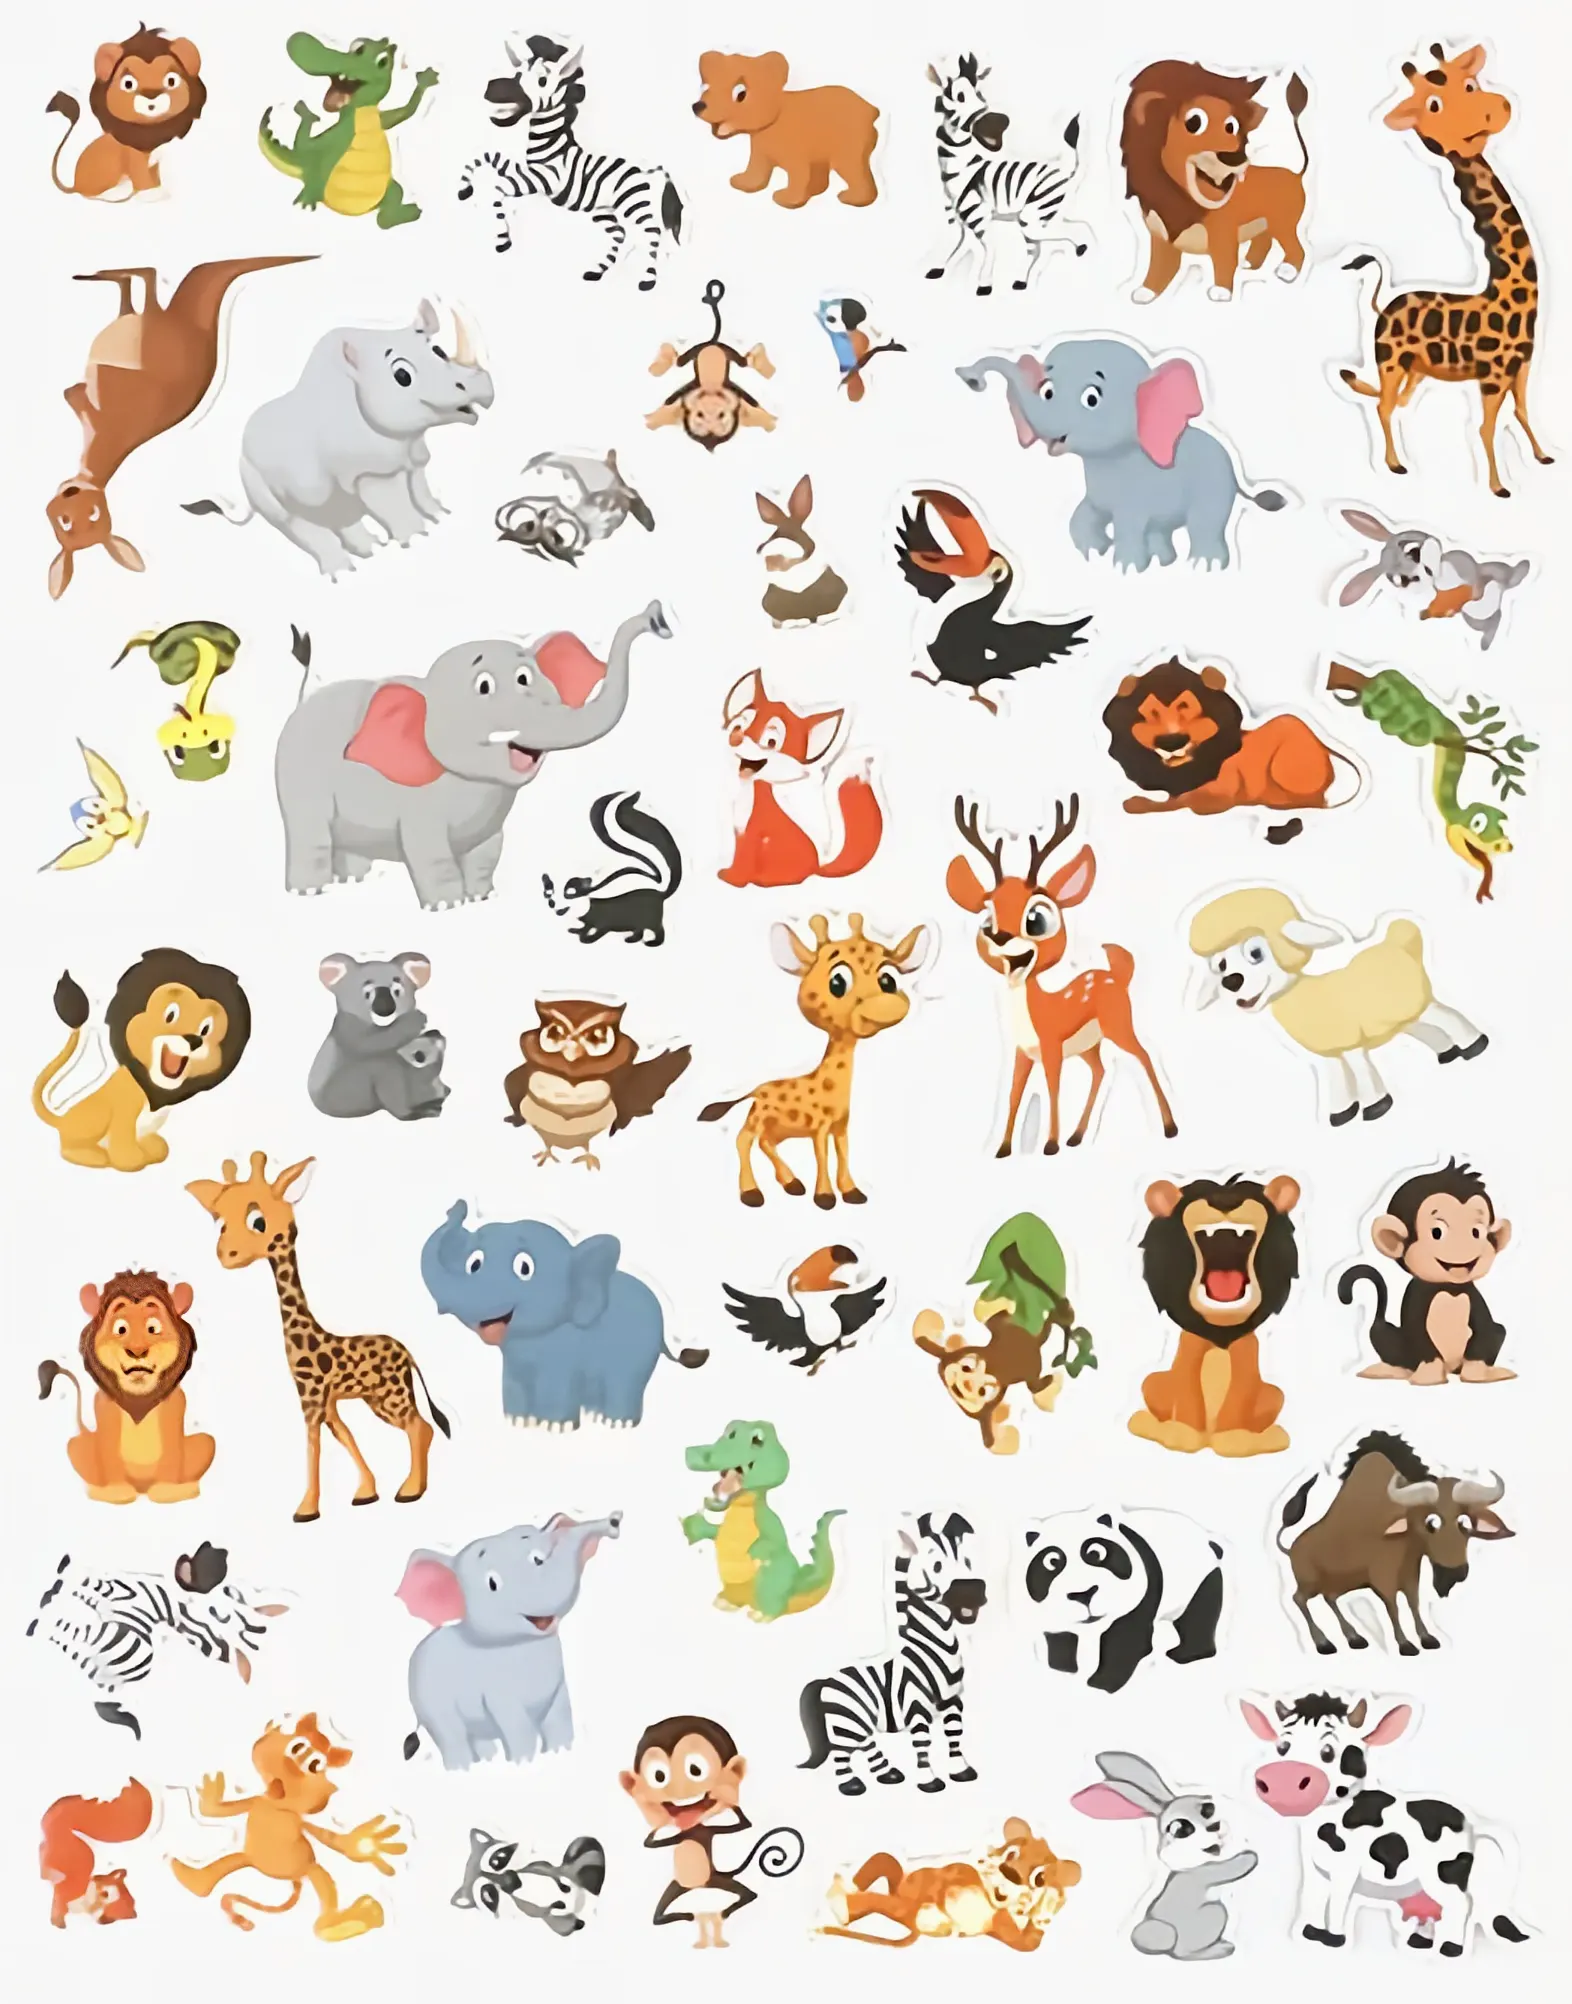 Toys Gifts Sticker Book Zoo Animals Window Clings Decals for Toddlers Home Airplane Classroom Nursery Safari Party Supplies